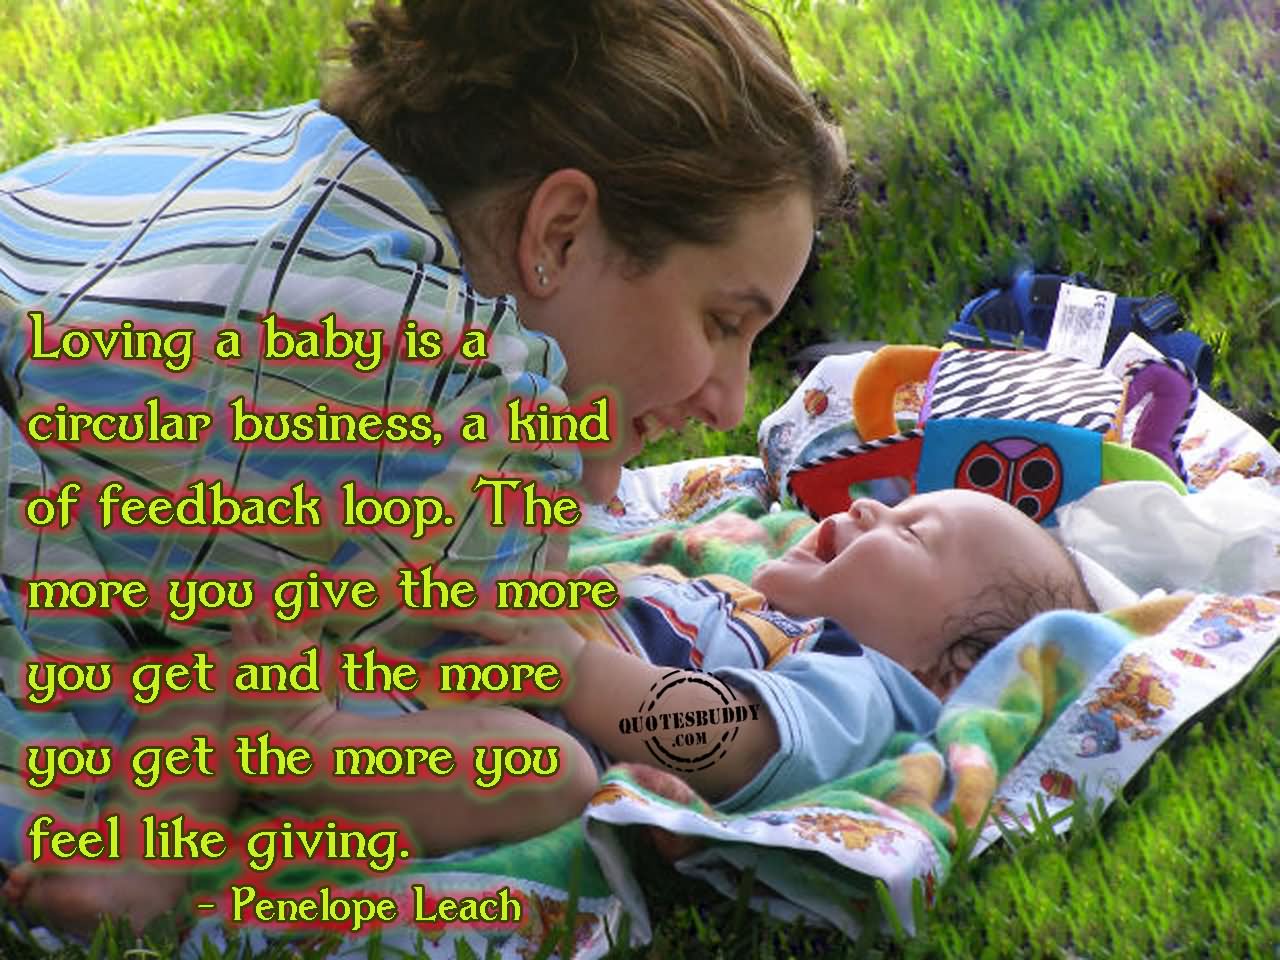 Loving A Baby Is A Circular Business, A Kind Of Feedback Loop. The More You Give The More You Get And The More You Get The More You Feel Like Giving.